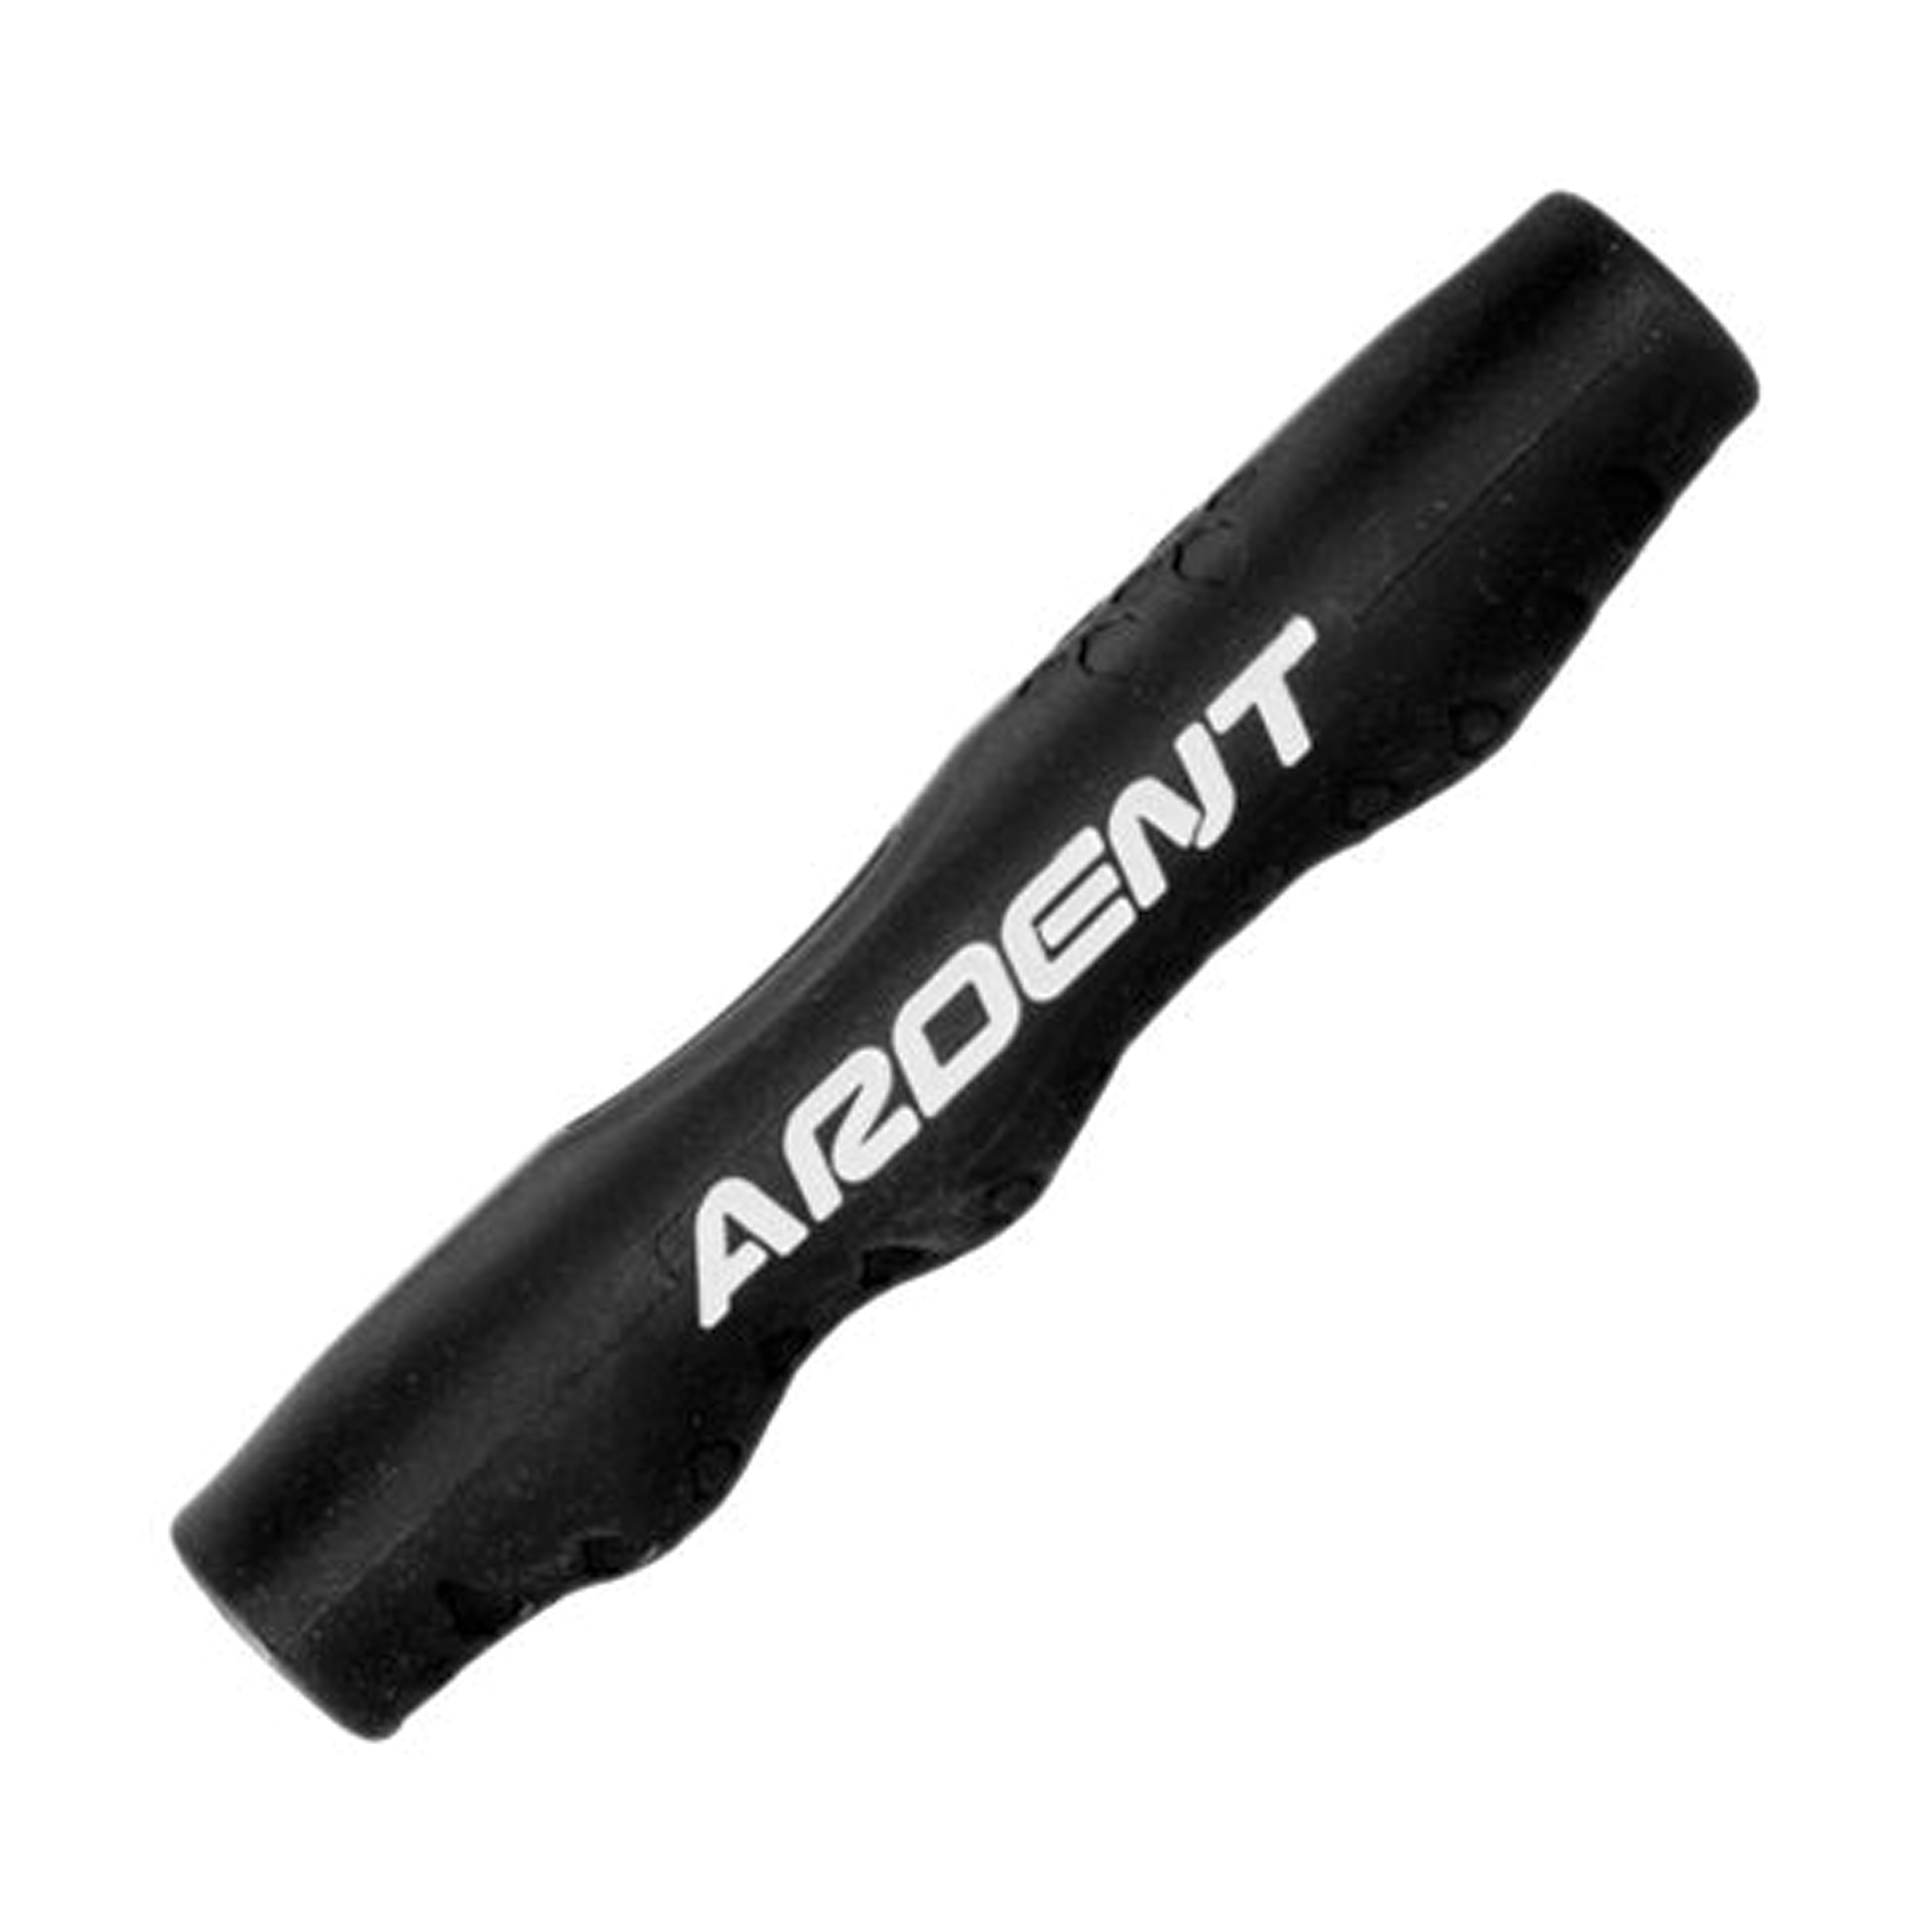 Ardent Pro Rod Over Grip - Spinning or Baitcasting, Universa